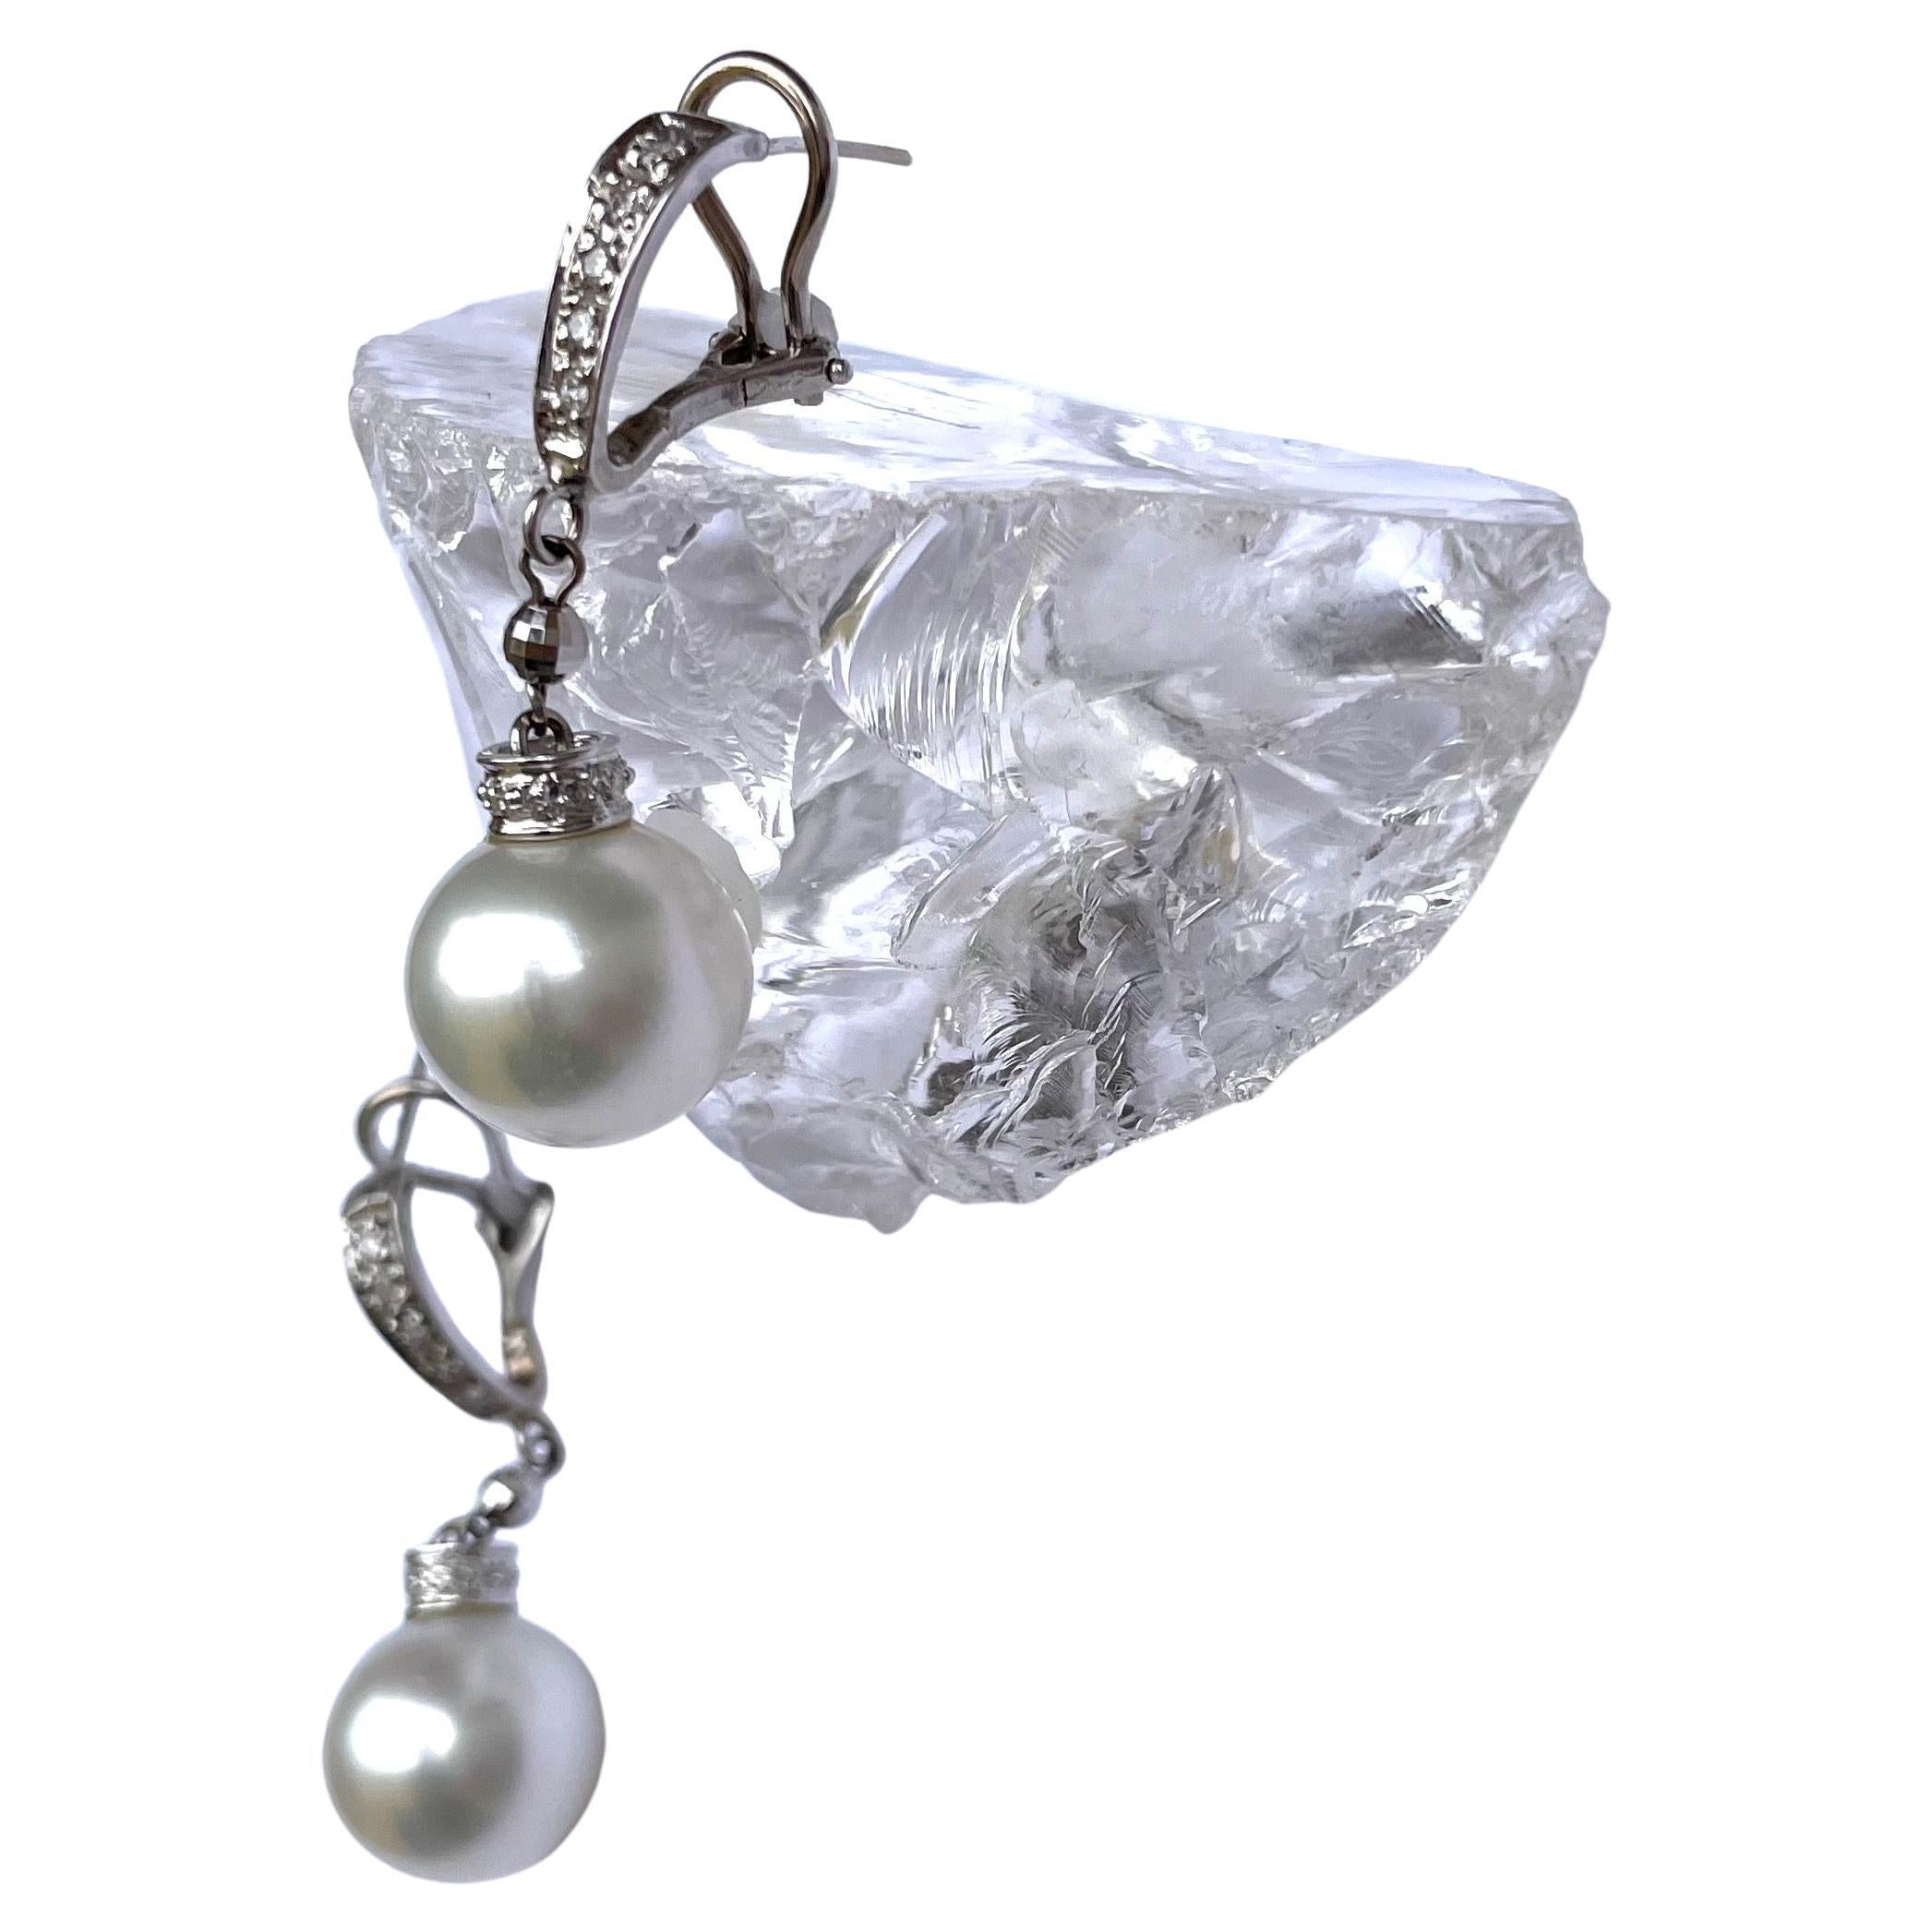 Description
Stylish exquisite South Sea pearls earrings with diamonds
Item # E1034

Materials and Weight
South Sea pearls 12.4mm, round
Diamonds
Posts and omega backs 14k white gold
14k white gold

Dimensions
Length 2 inches

Made in Newport Beach,